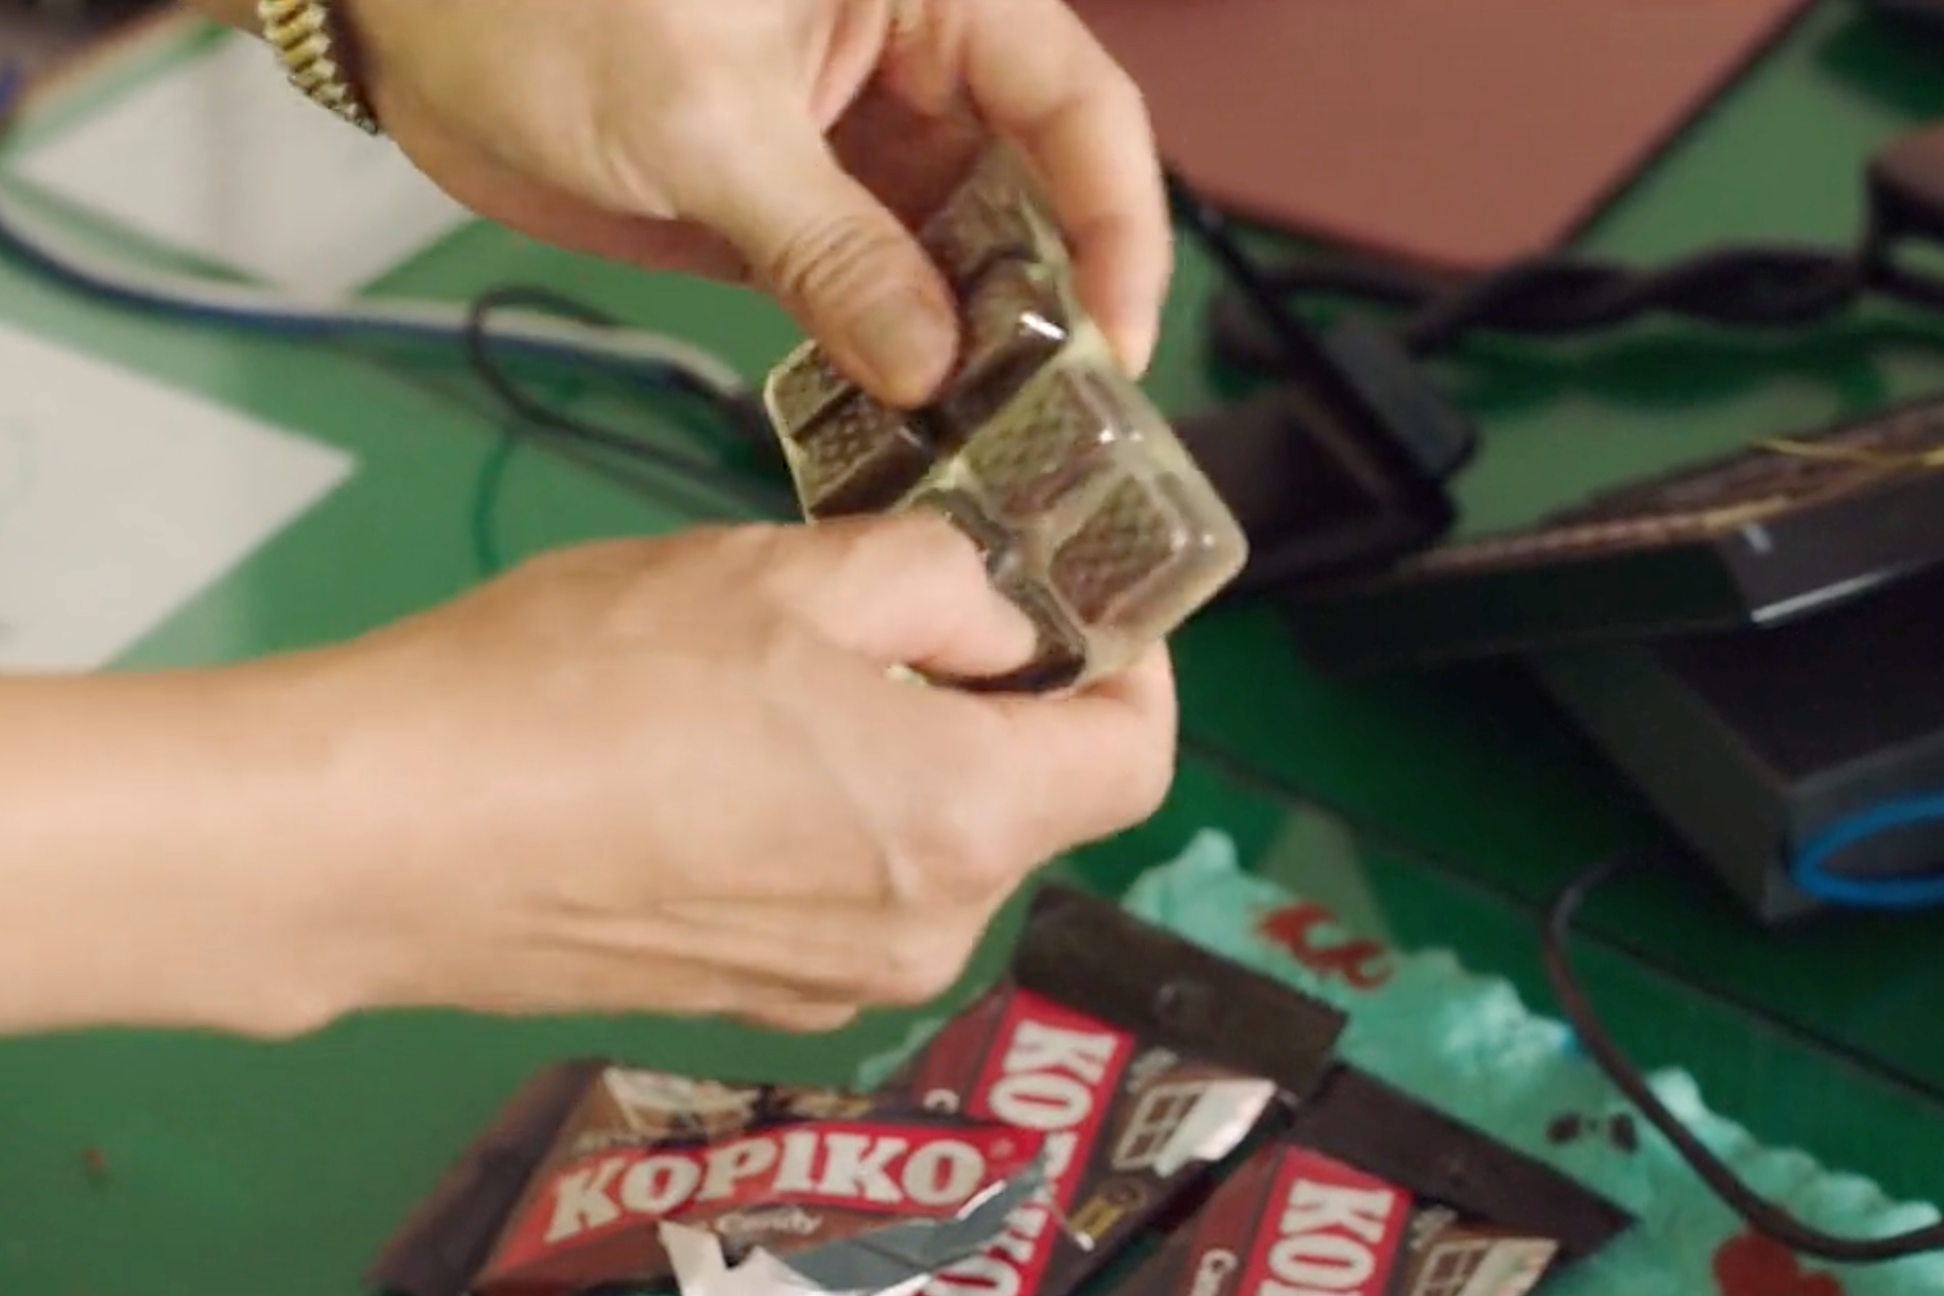 Pressing a Kopiko candy from the blister pack in the k-drama, Hometown Cha-Cha-Cha